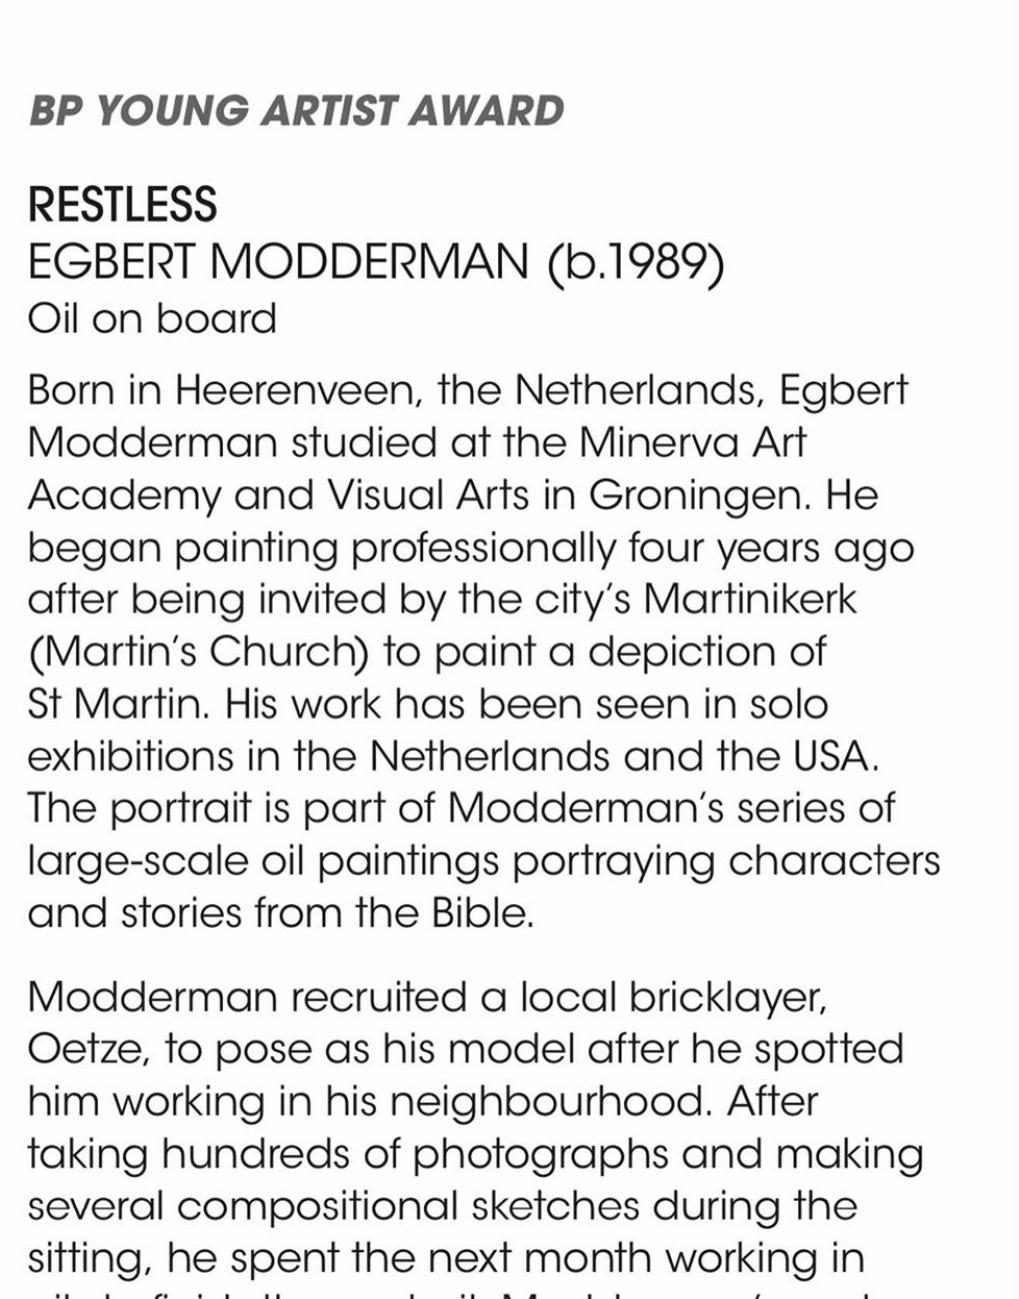 EGBERT MODDERMAN WINS BP PORTRAIT AWARD FOR YOUNGSTERS 2020

London (GBR) May 5, 2020

Great International Art Prize after Egbert Modderman.

The prize, instituted by 